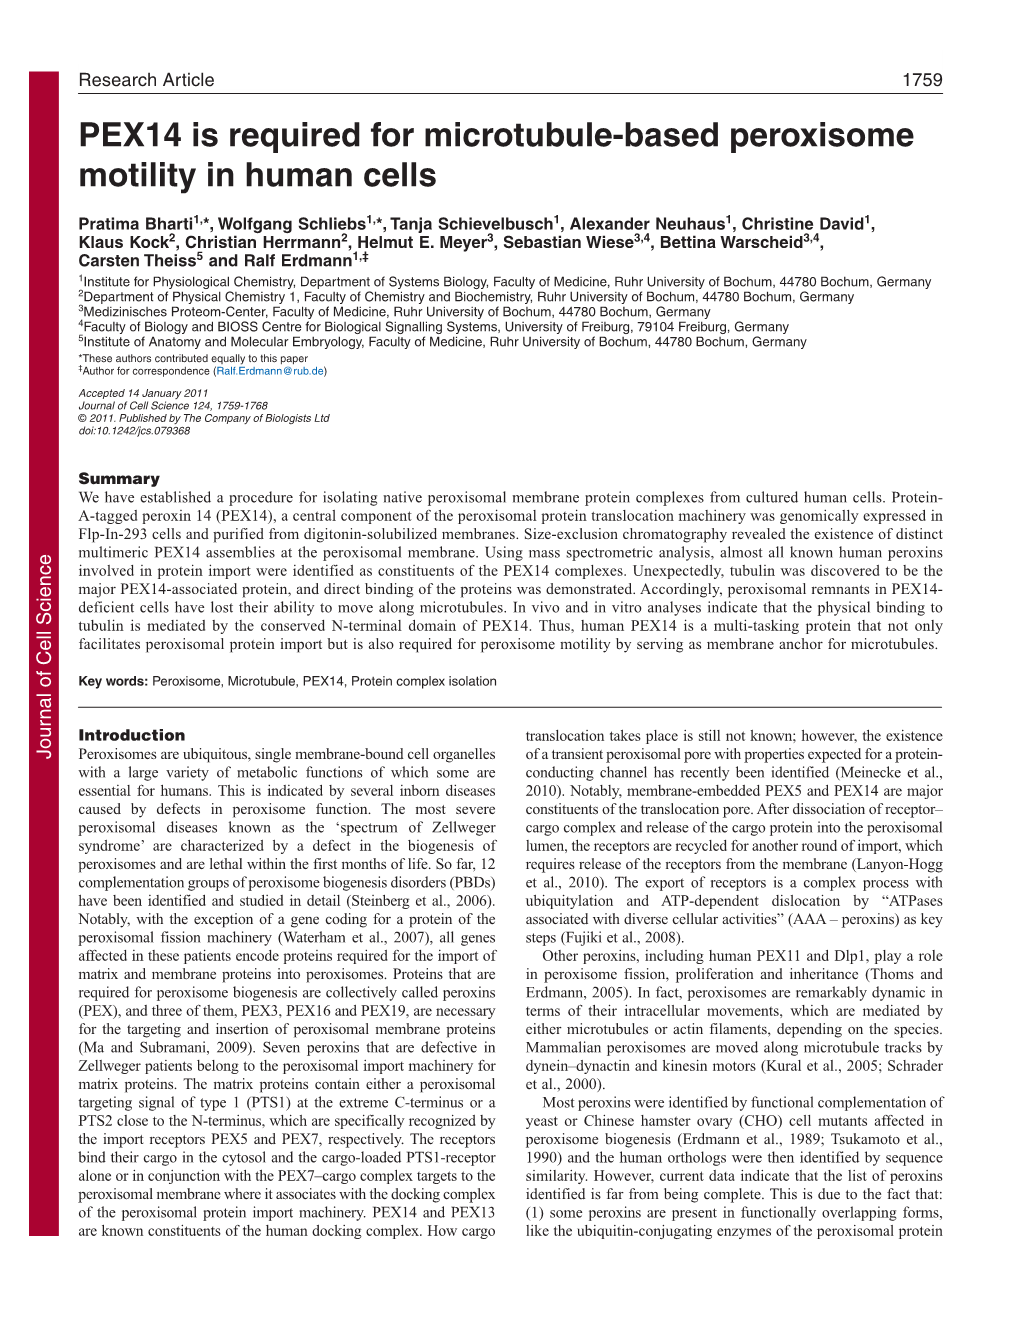 PEX14 Is Required for Microtubule-Based Peroxisome Motility in Human Cells